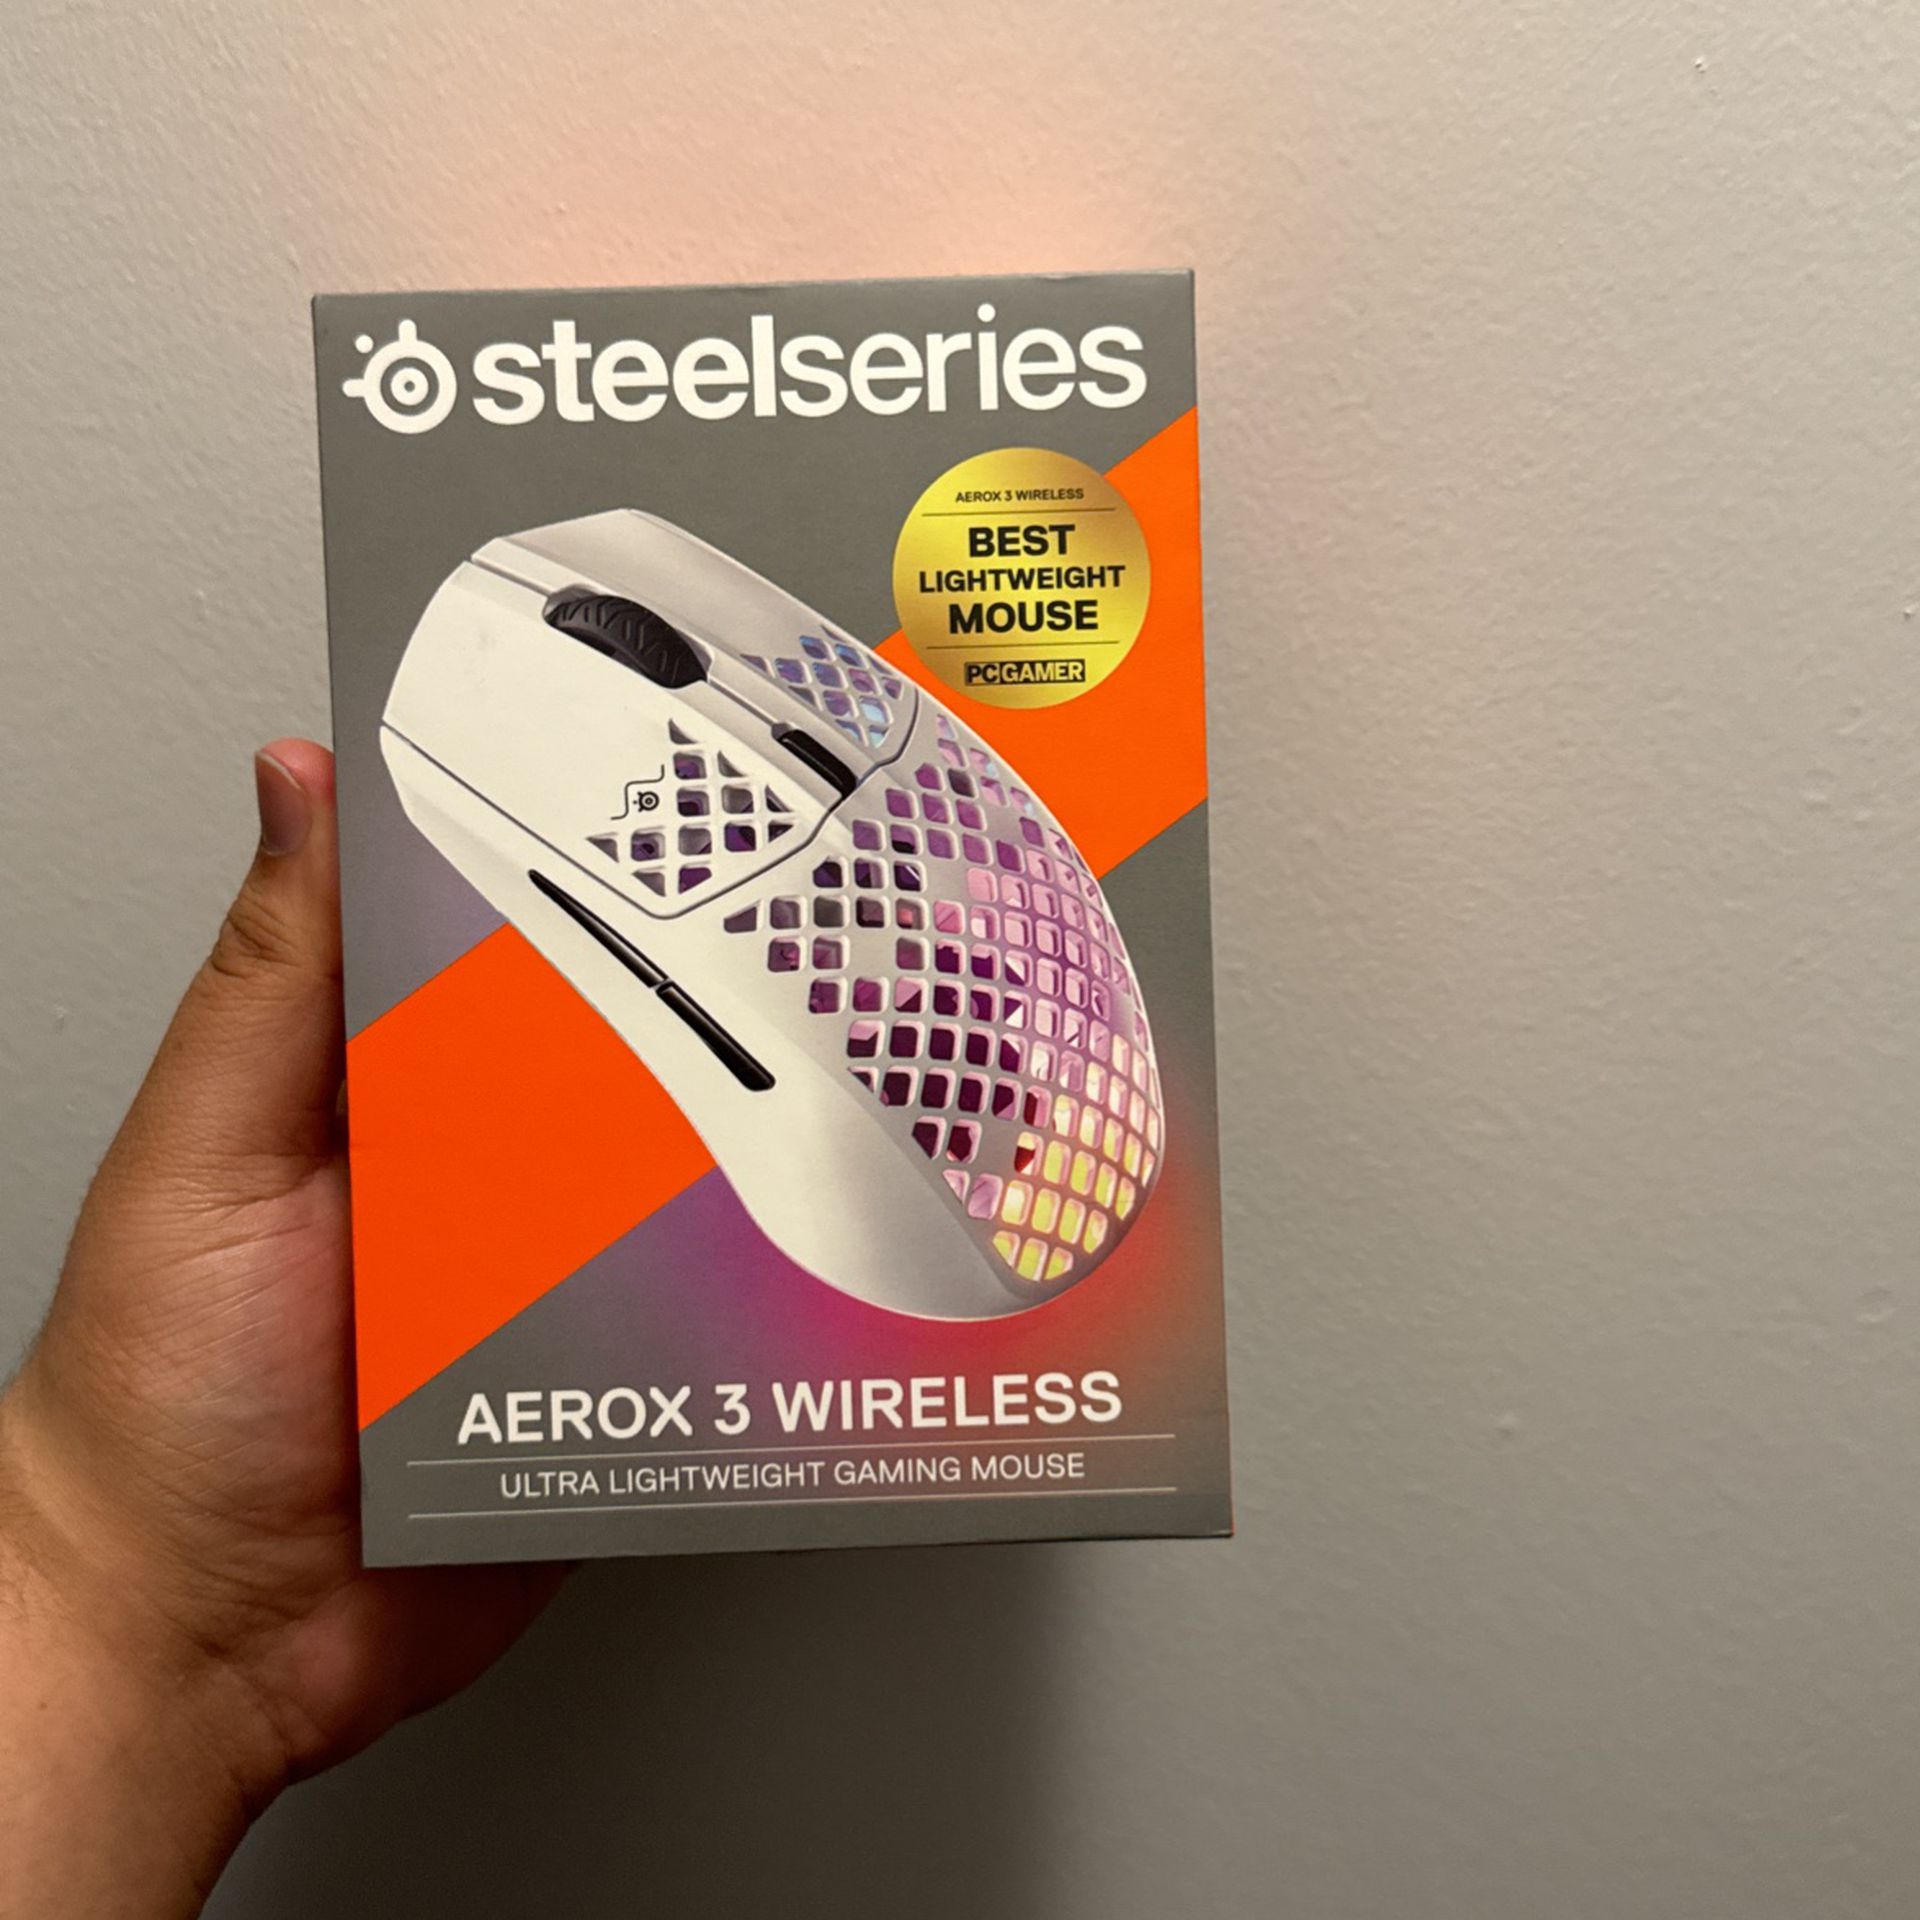 SteelSeries Aerox 3 Wireless Ultralight Gaming Mouse